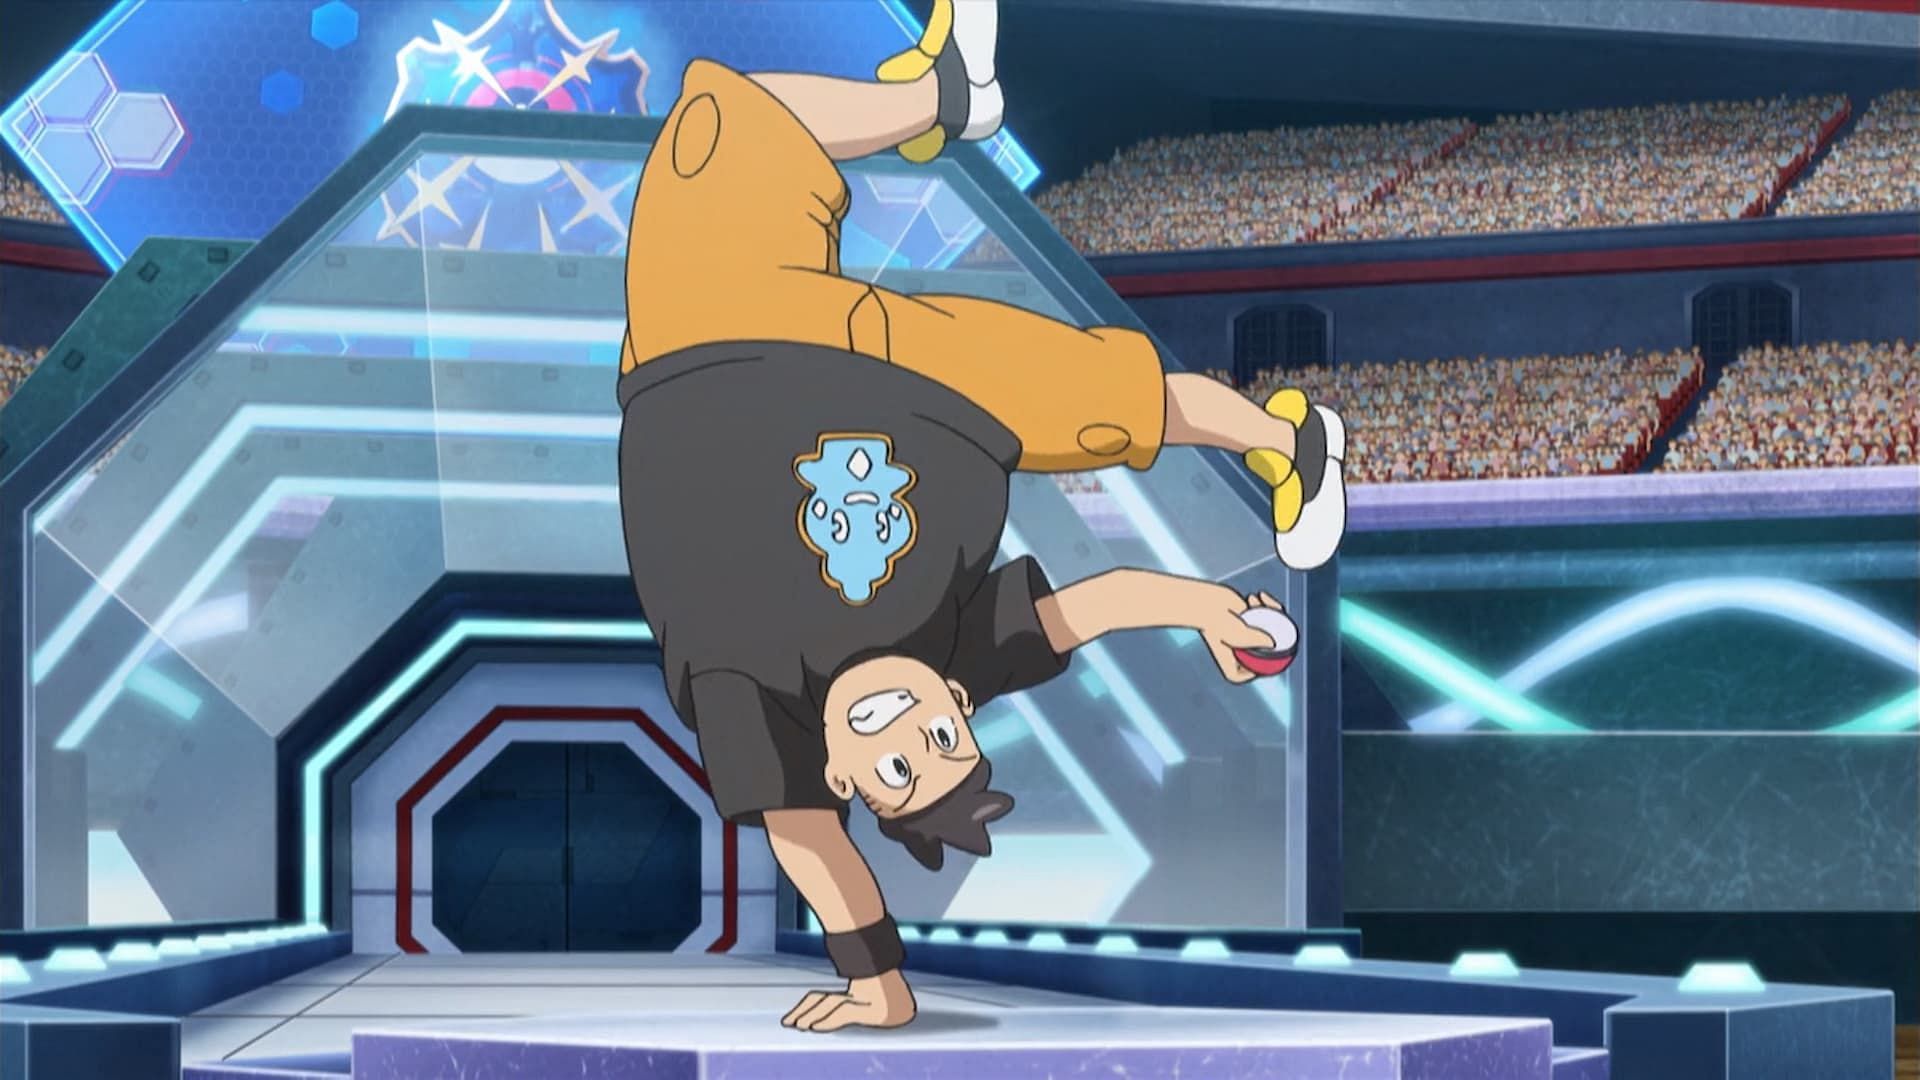 Tierno dancing in the anime (image via TPC)